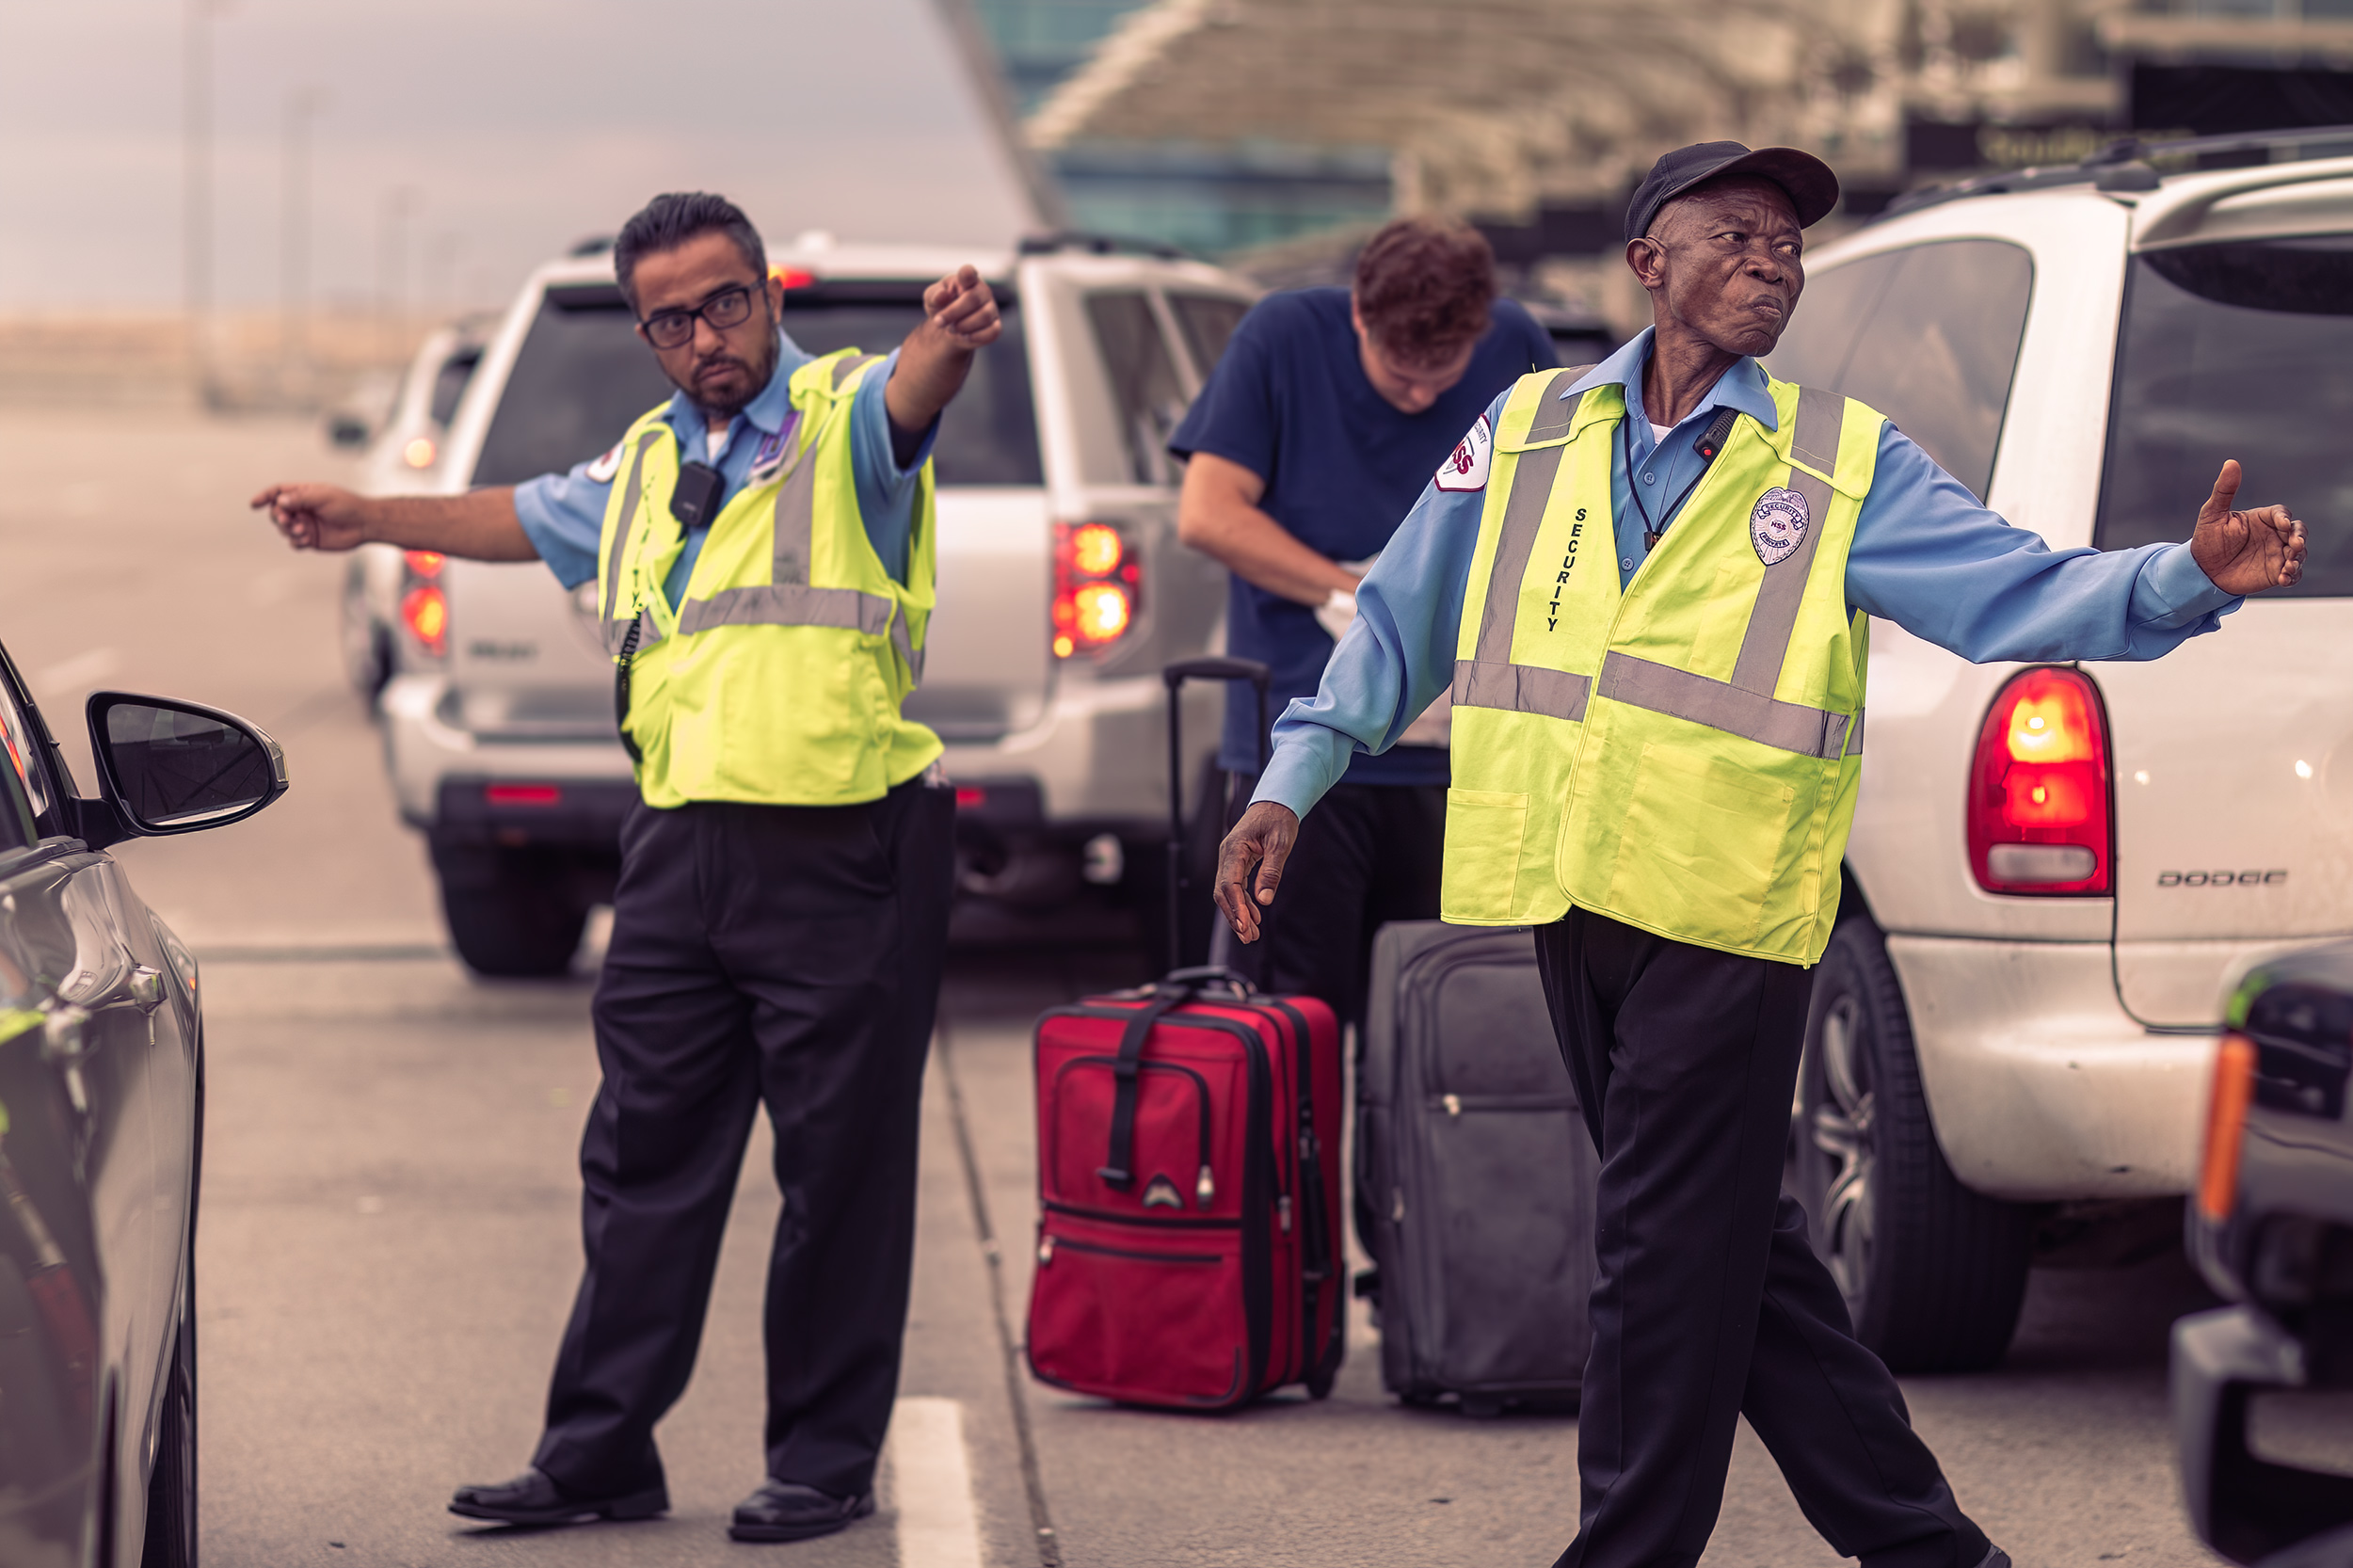 Security Guards directing traffic at airport.